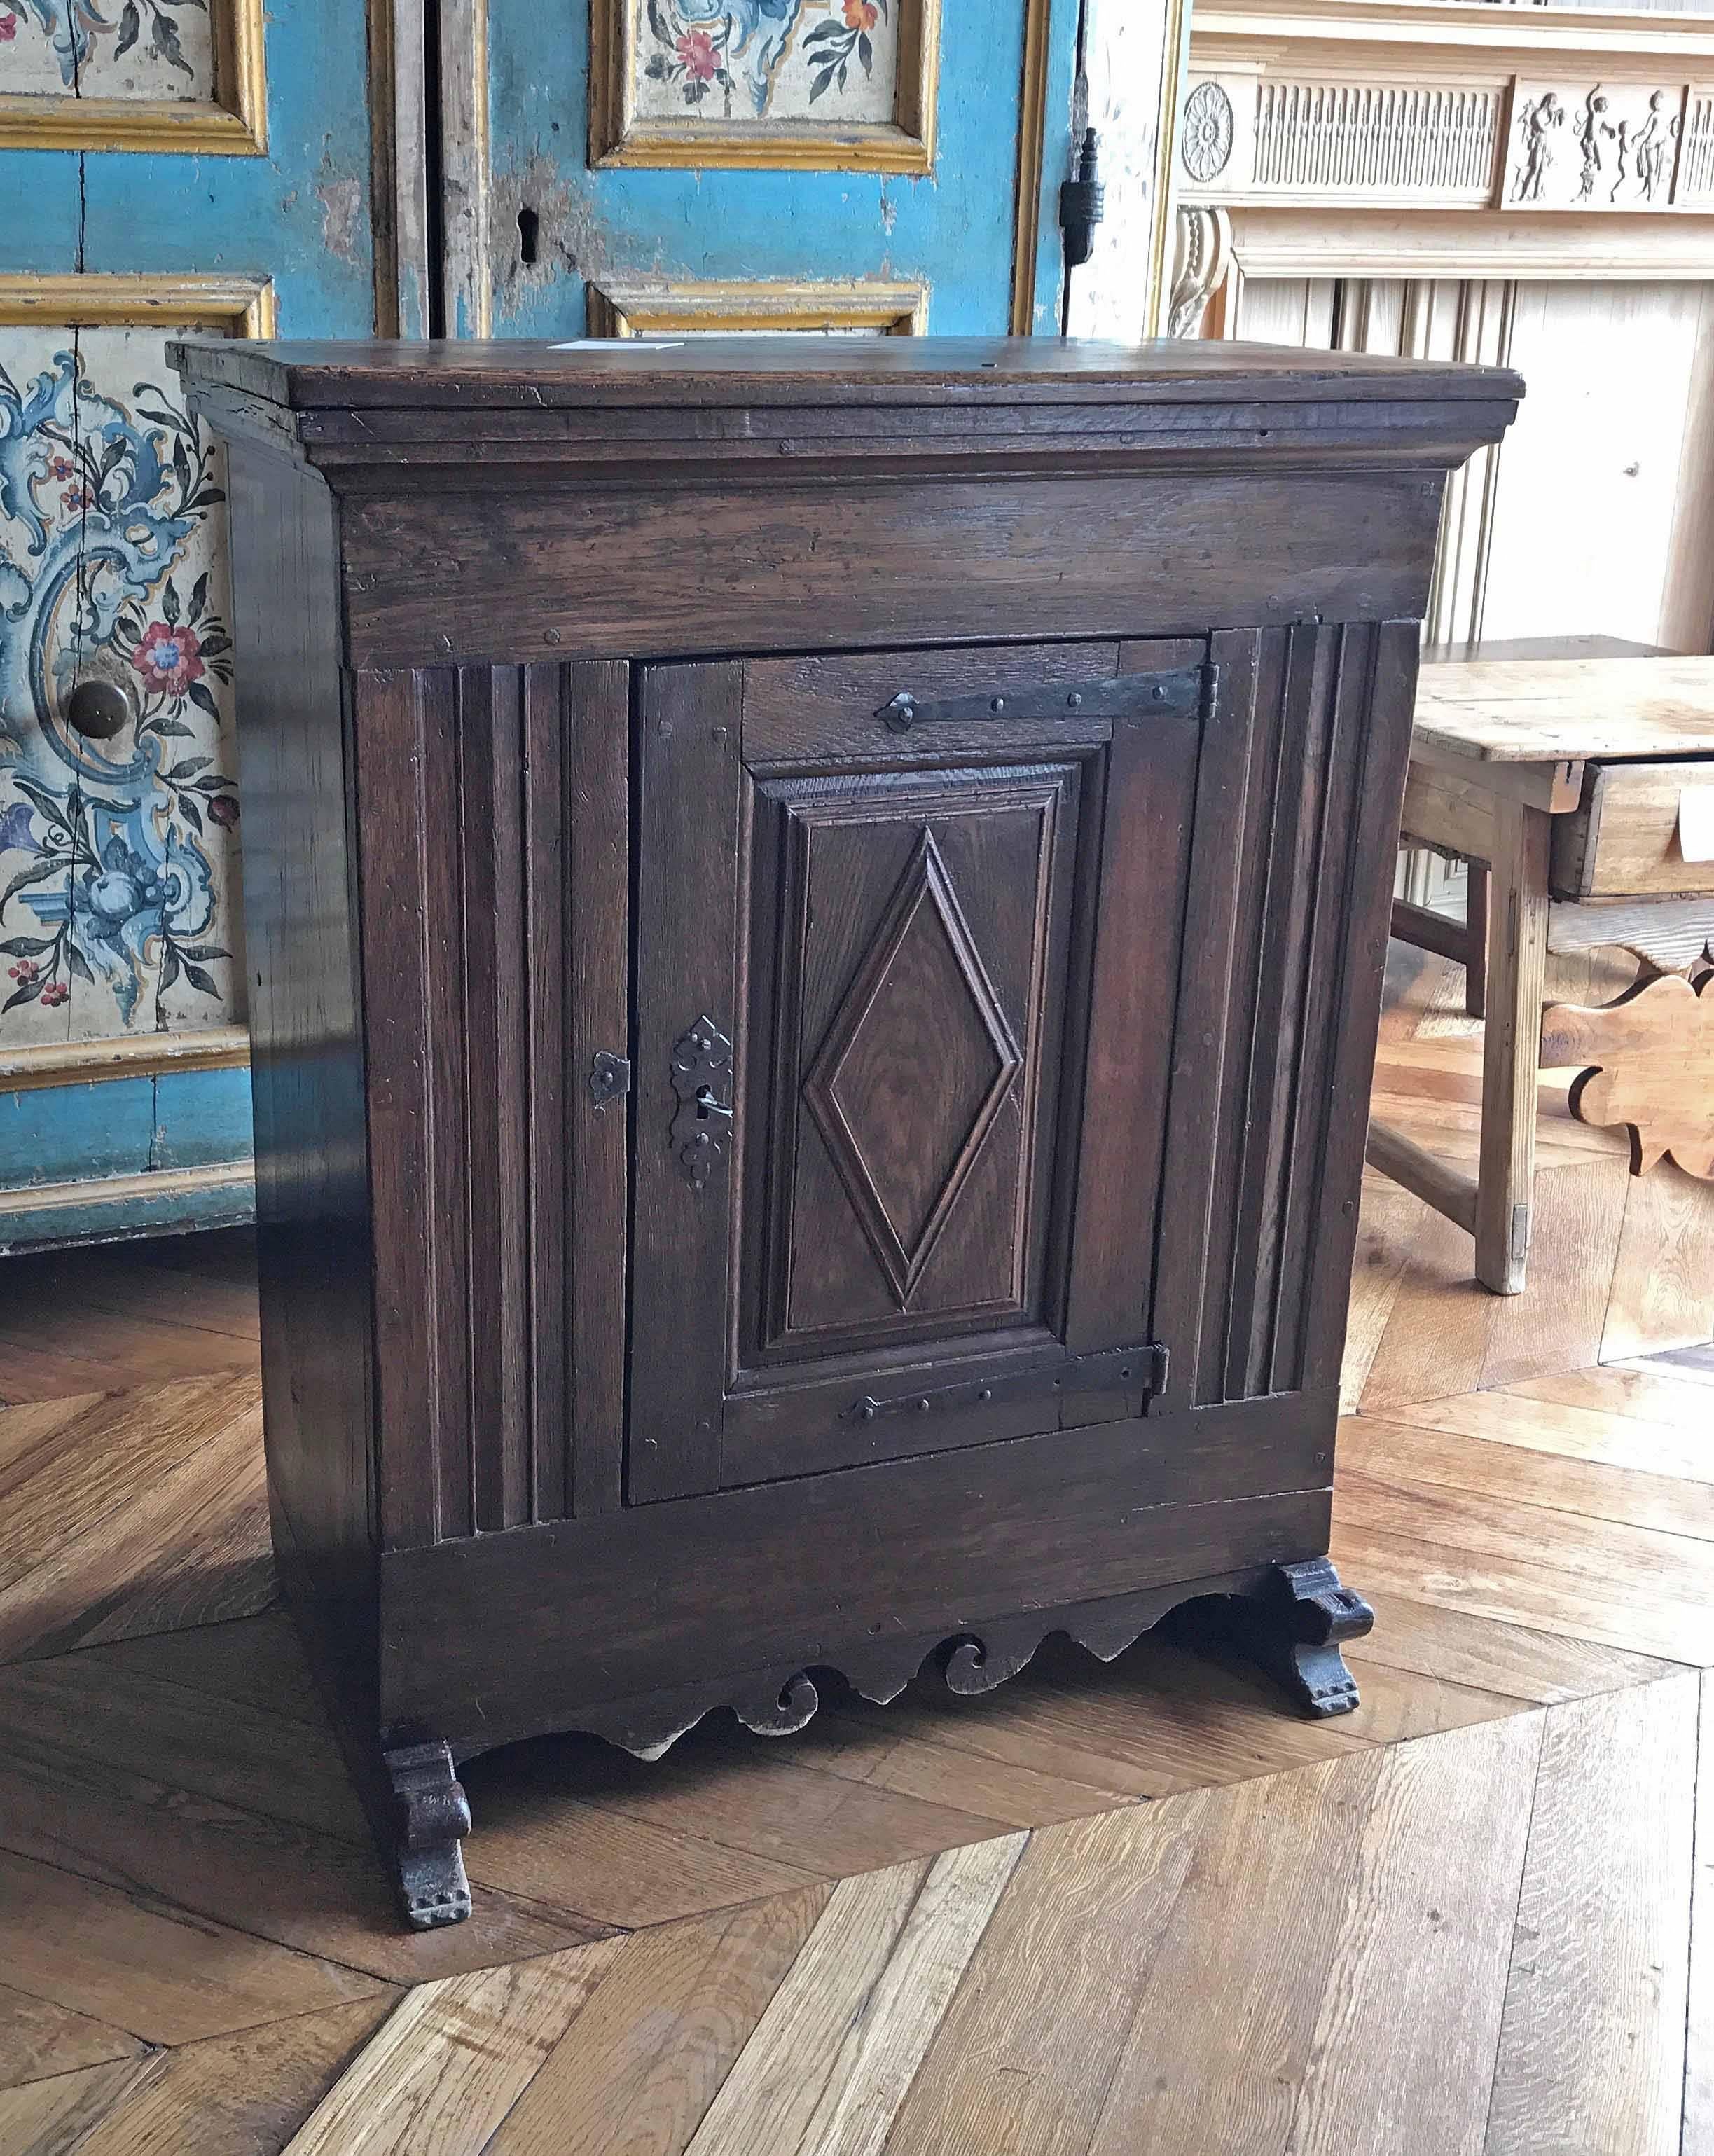 Antique Spanish carved end table with front door.

Origin: Spain, 

circa 1815

Measurements: 30 1/4